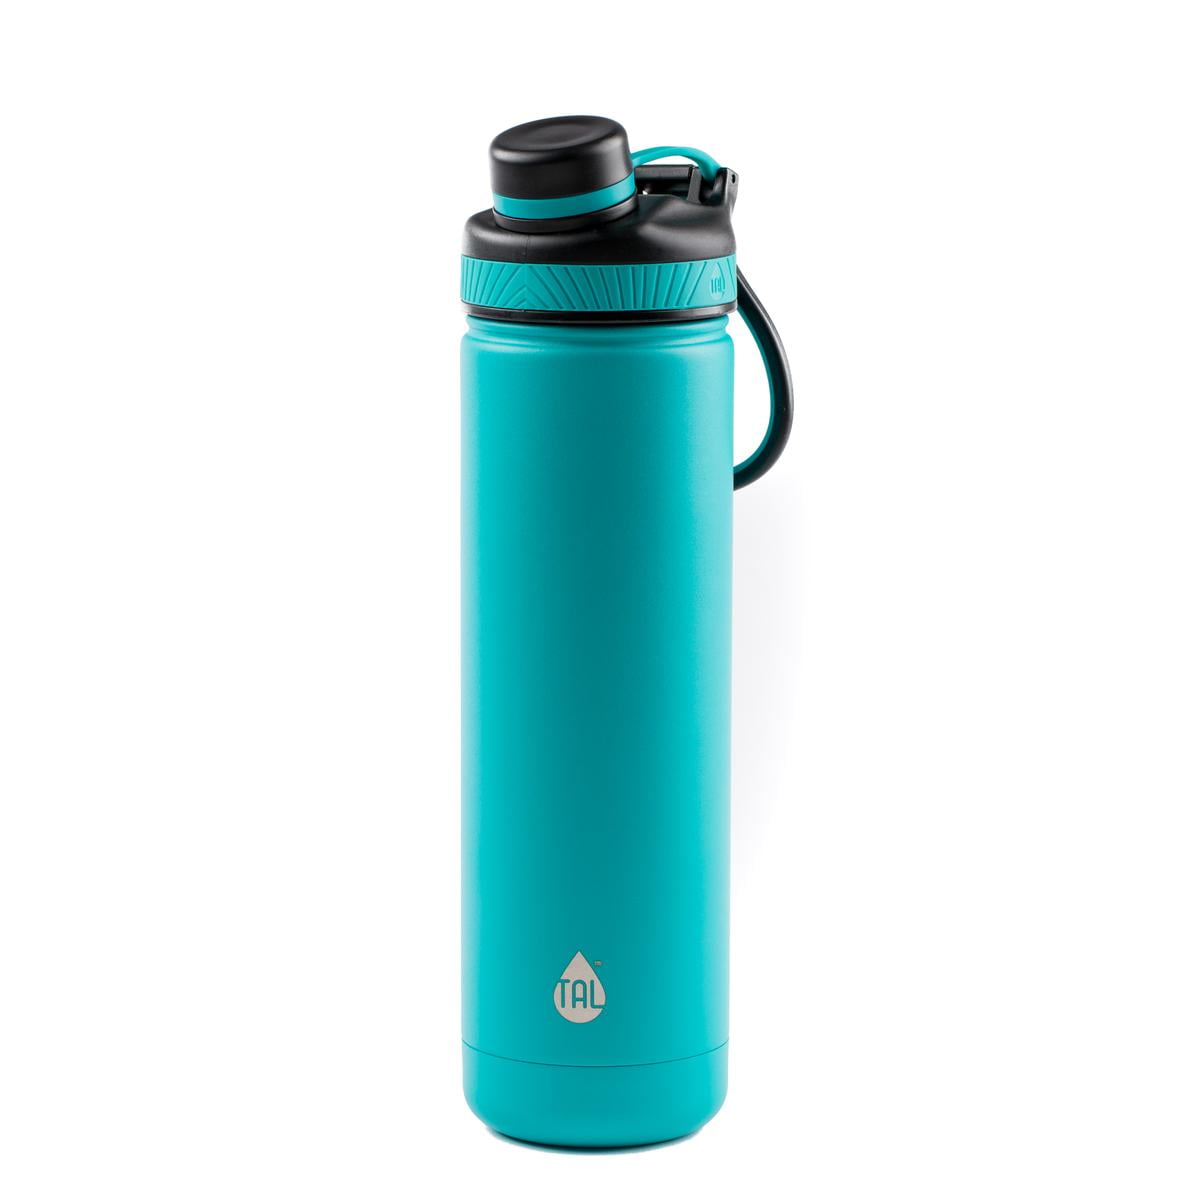 Tal Water Bottle, Tal Hydration - China Stainless Steel Insulated